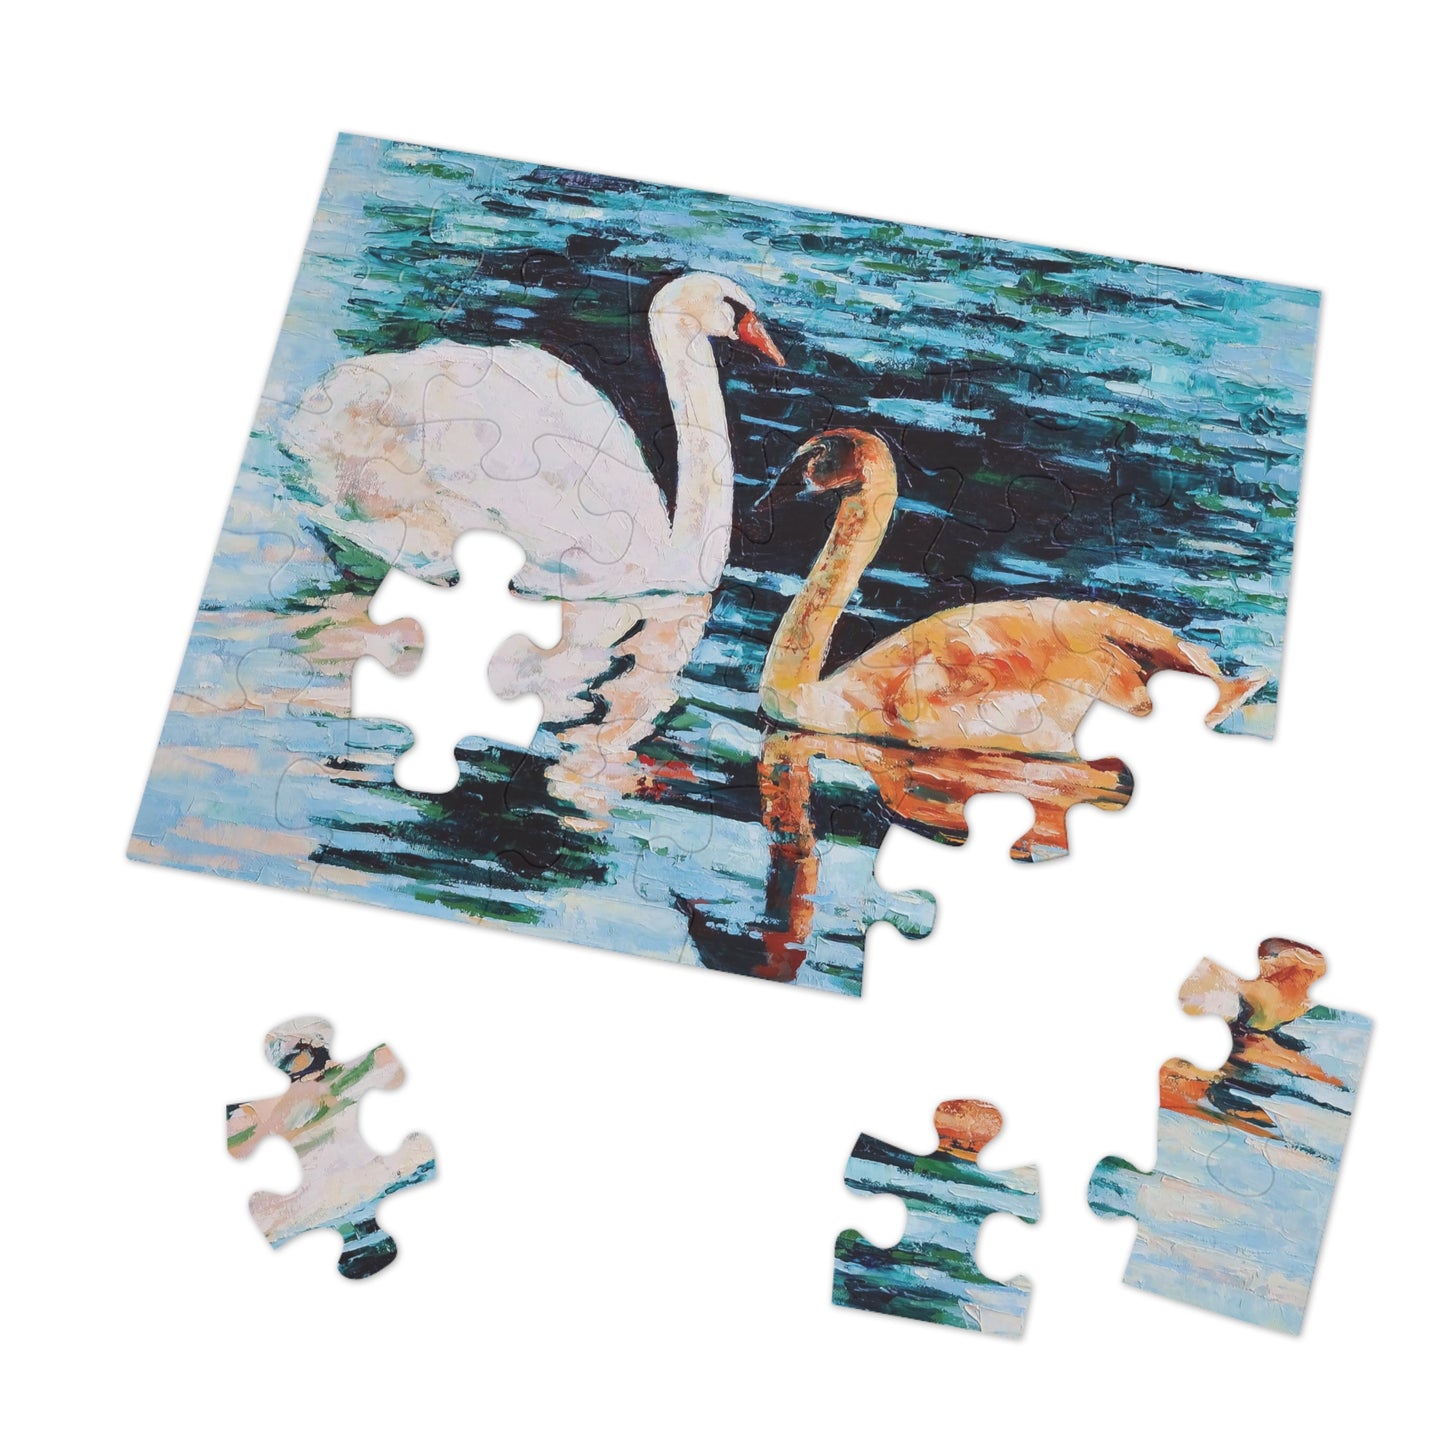 Jigsaw Puzzle - Swans on Lake with Reflections